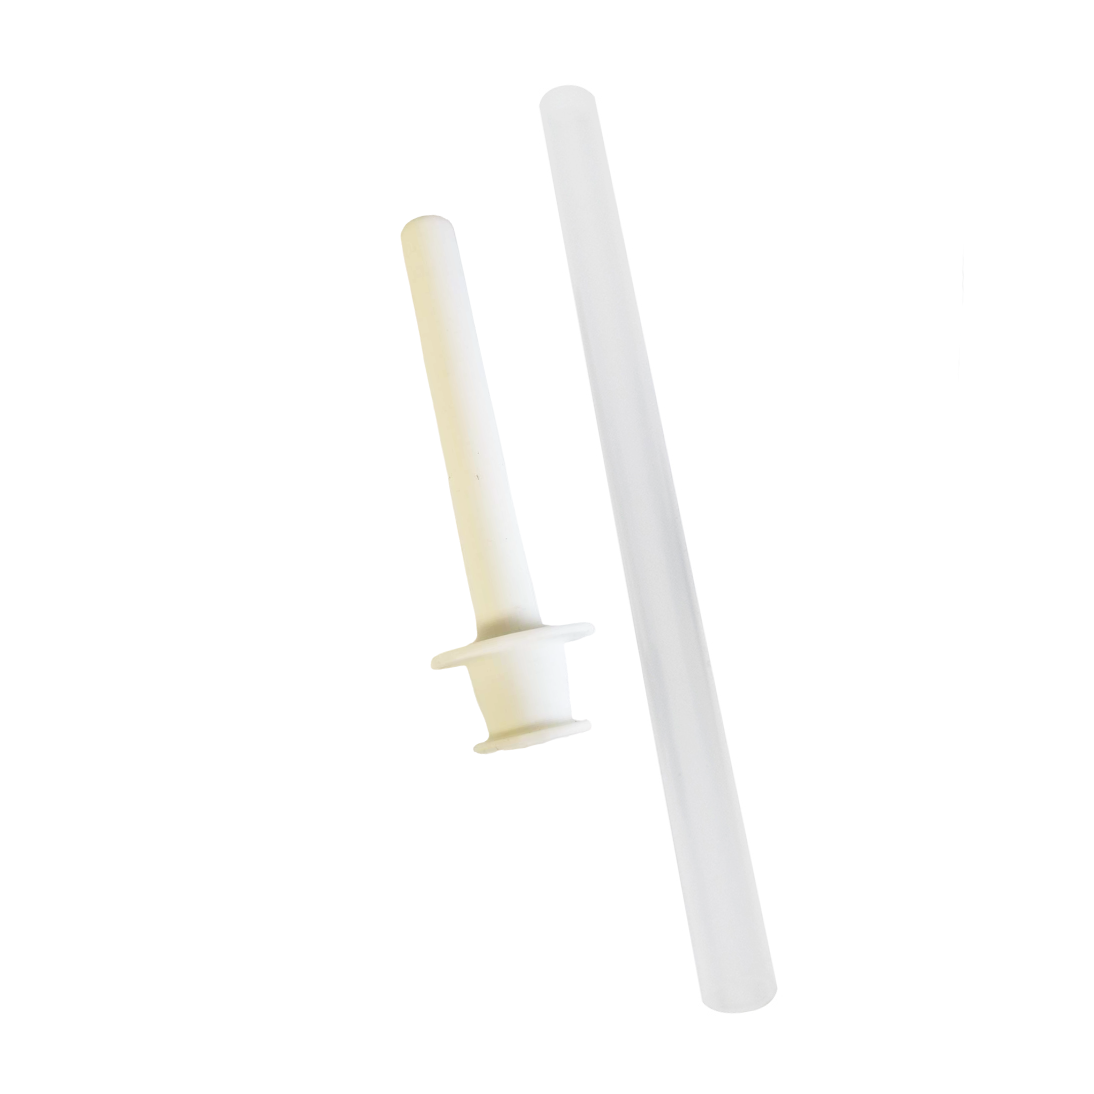 Replacement Straw Set for 40oz Voyager, 3 Pack (Powder Blue